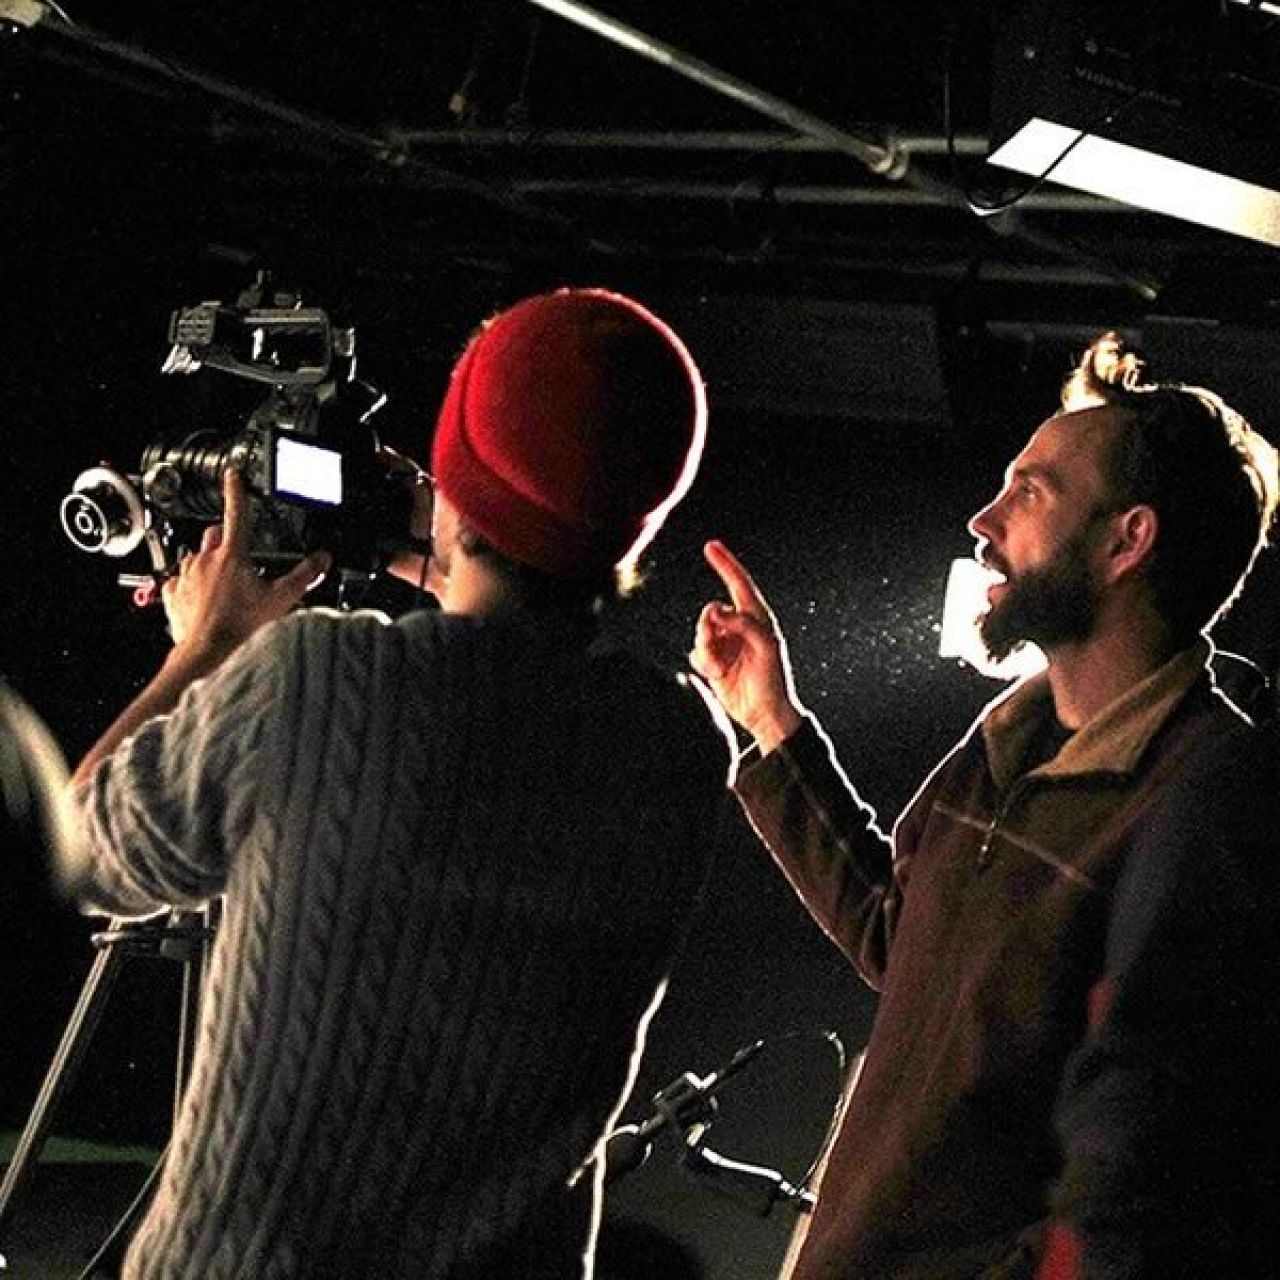 A student in cable knit sweater and red beanie cap holds a camera while receiving instruction from a bearded faculty member on the right.